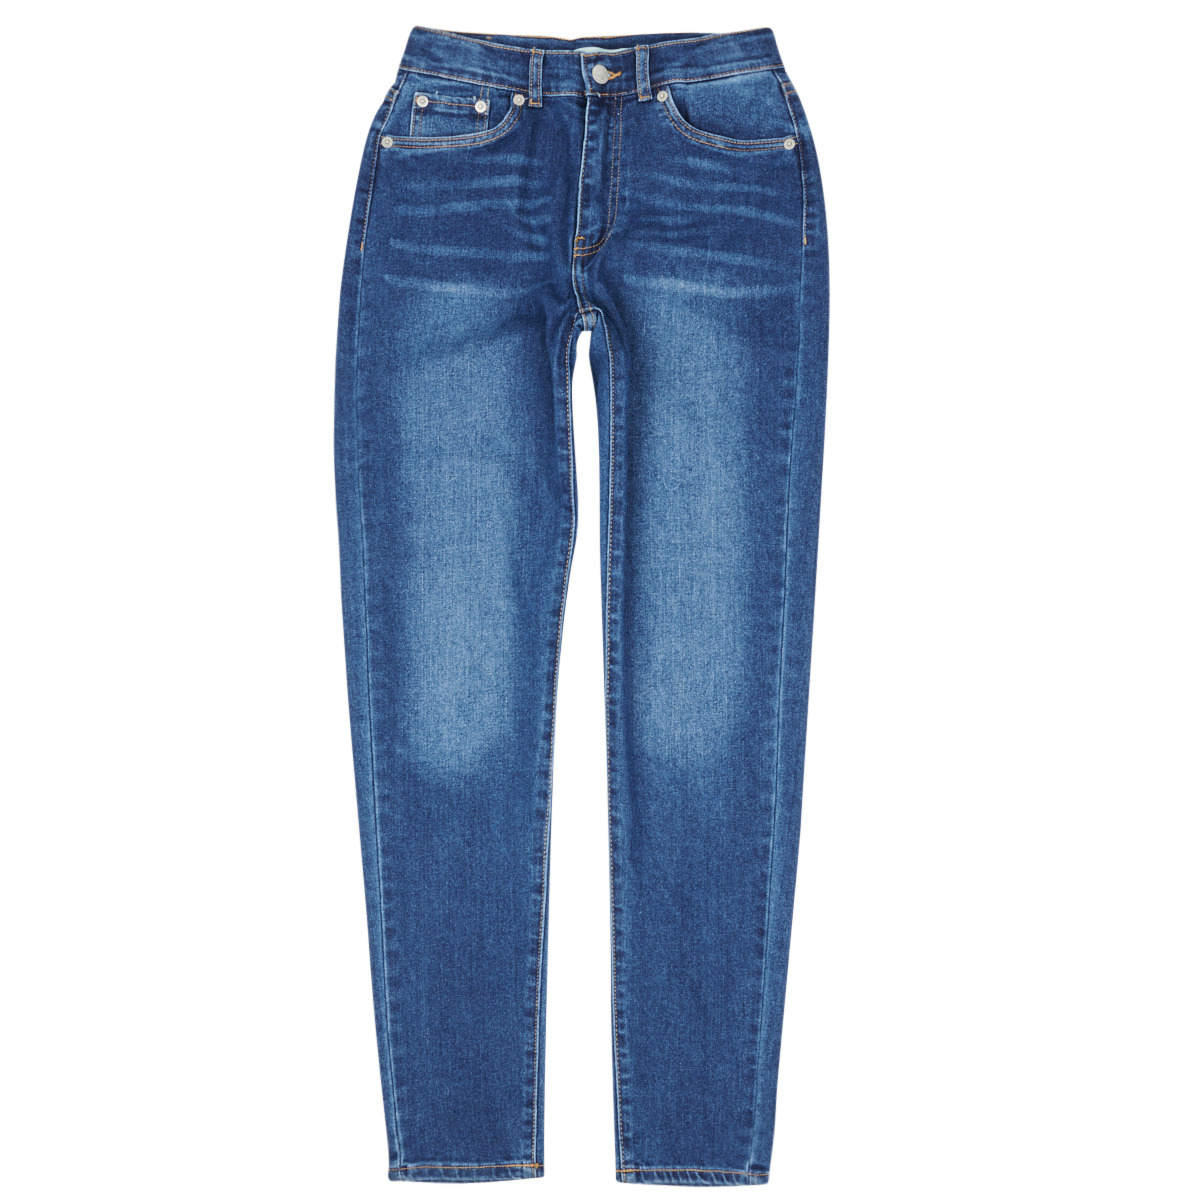 Levi´s ALL THE FEEL MINI MOM JEANS IVc6Jd2Y